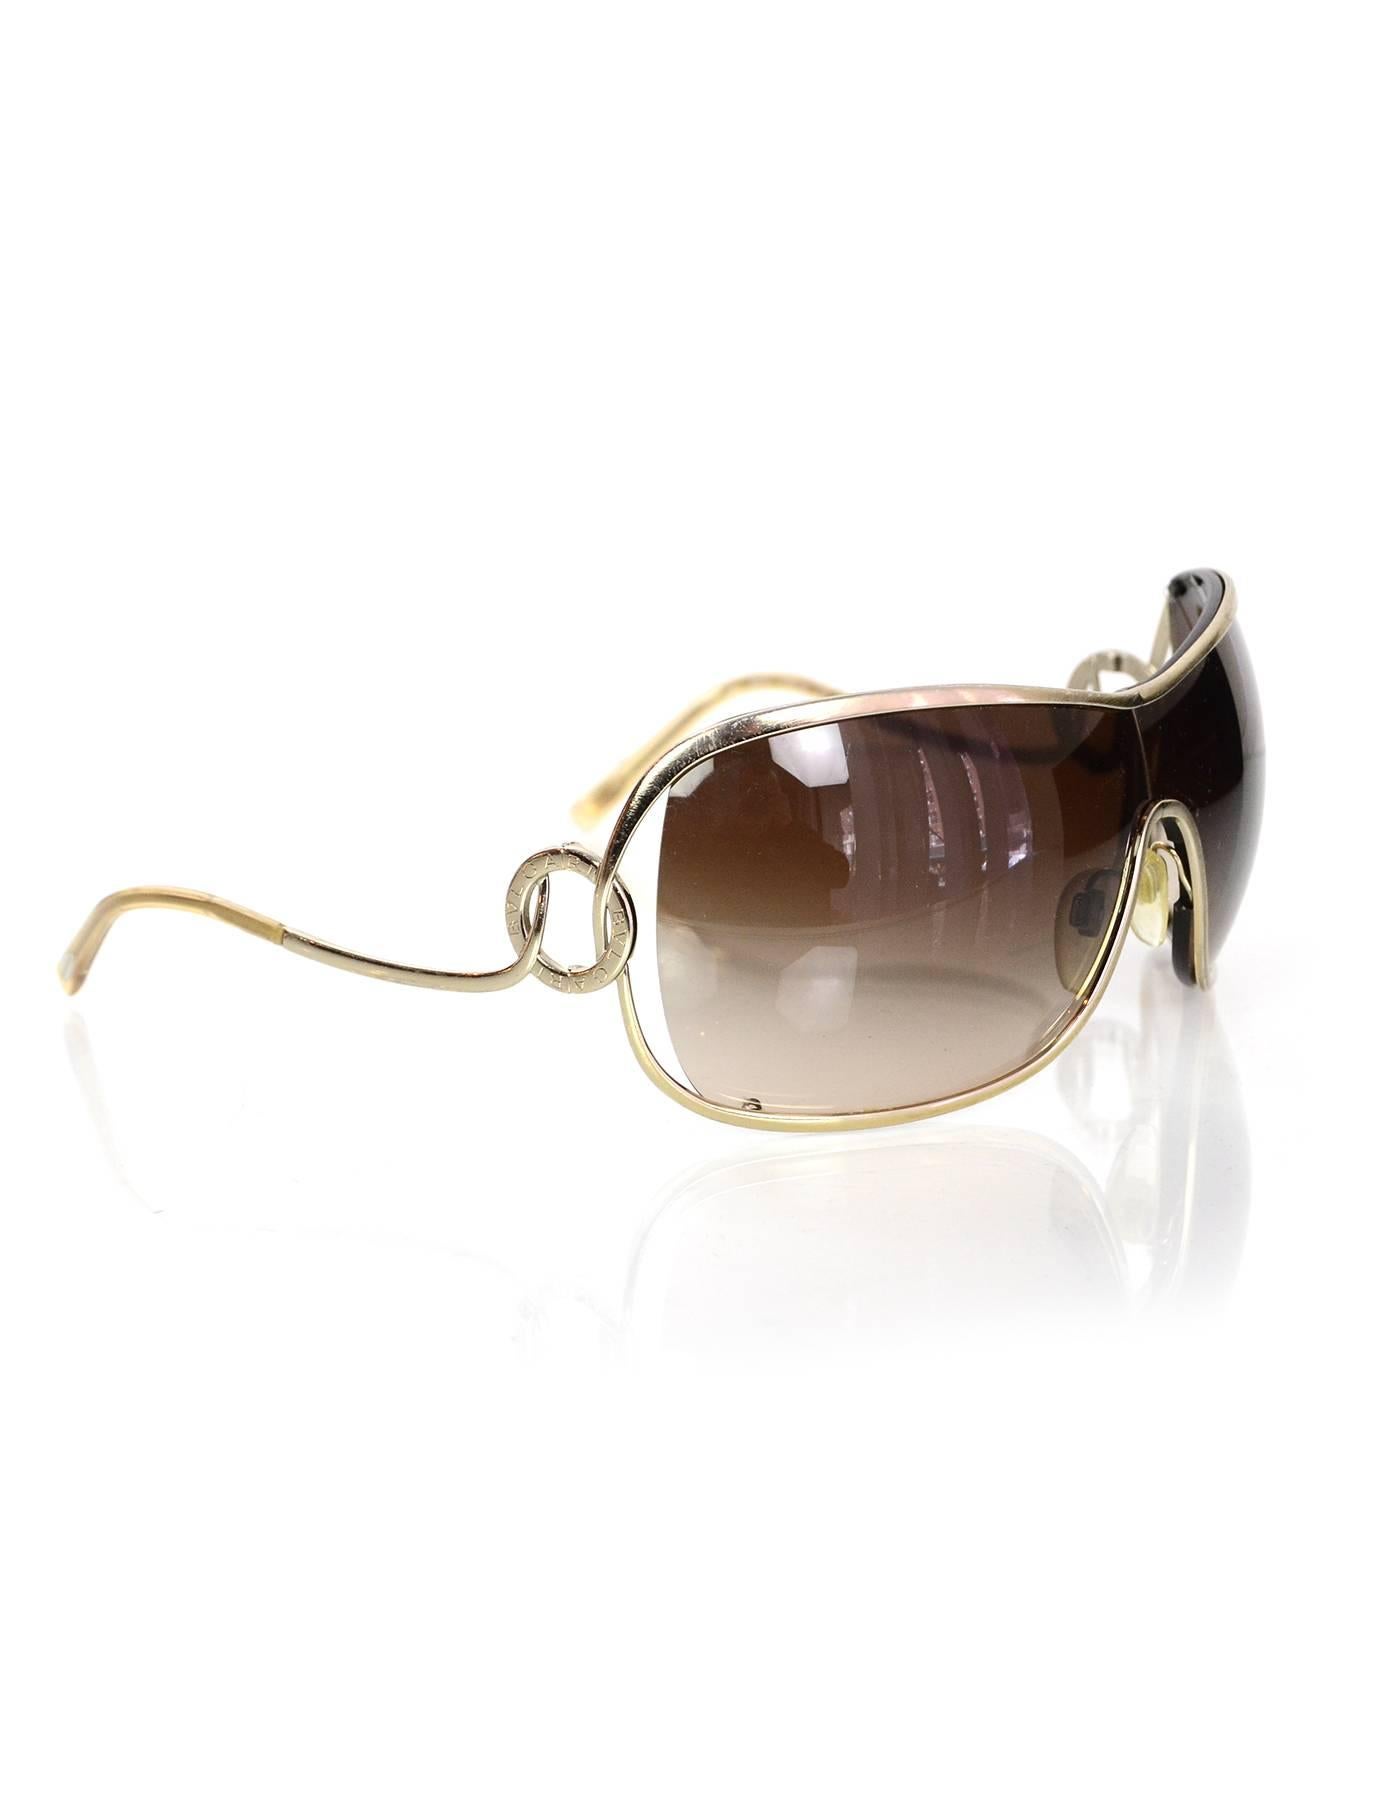 100% Authentic Bulgari Gold Frame Sunglasses. Features gradiant lenses in an oversized wrap-around shape. Gold metal frame with circular detail and logo at temple. Comes with original box and case. Excellent pre-owned condition.

Made In: